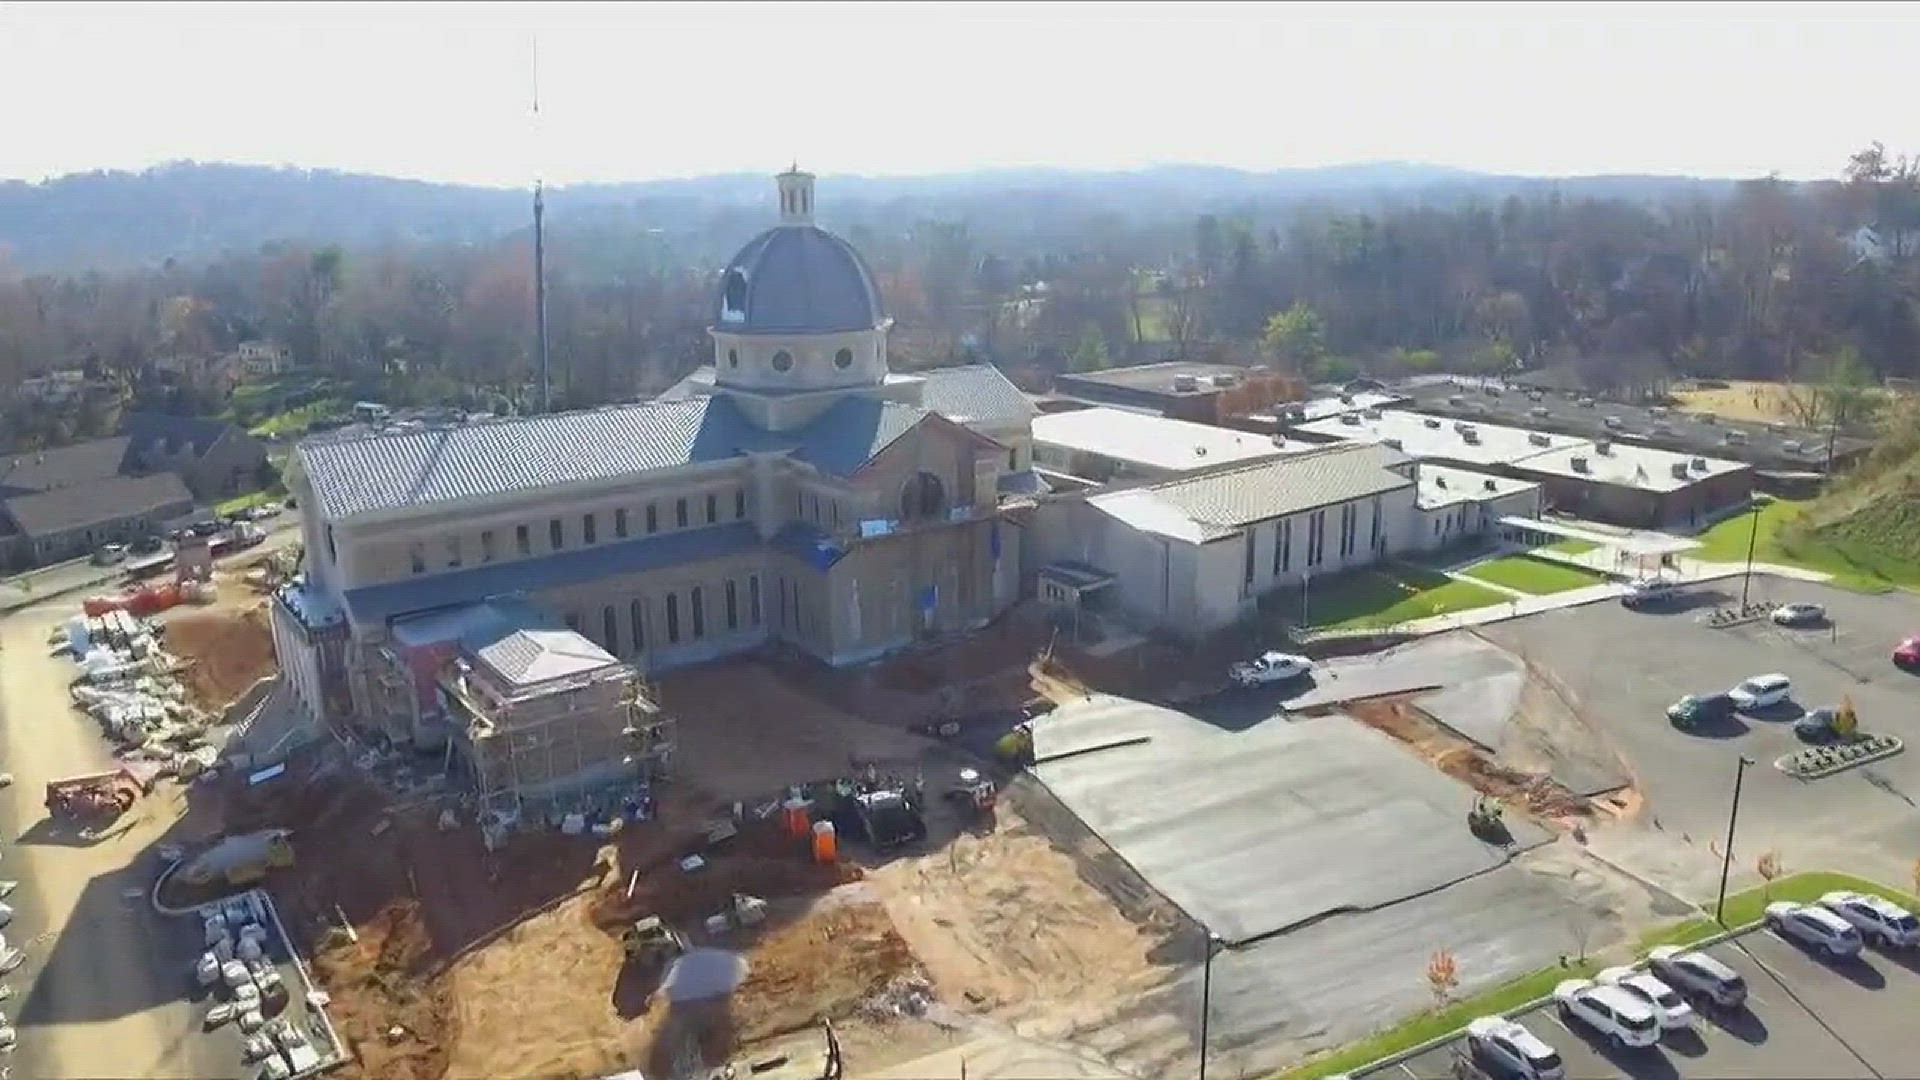 The new cathedral in Knoxville will be one of the biggest Catholic Churches in East Tennessee. It's  scheduled to open early next year.